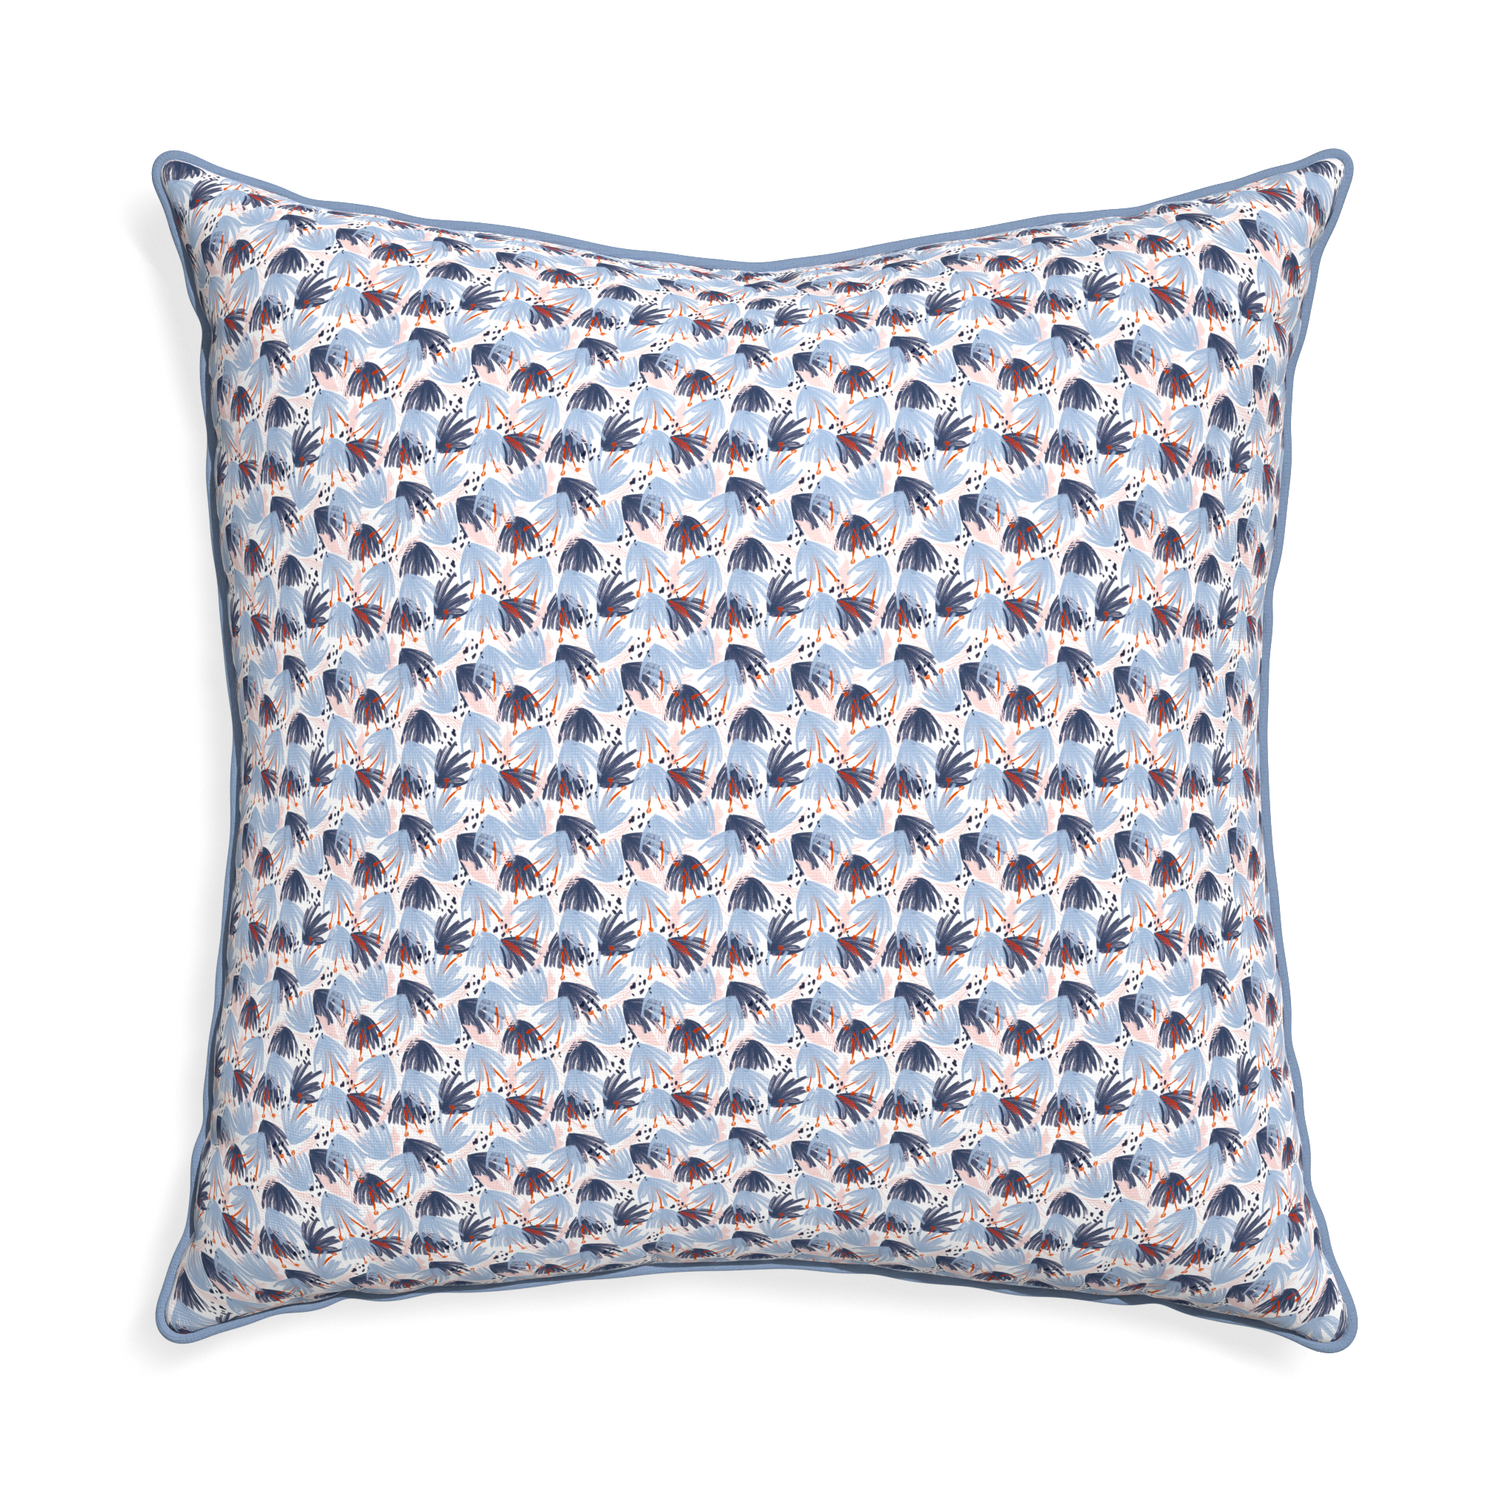 Euro-sham eden blue custom pillow with sky piping on white background